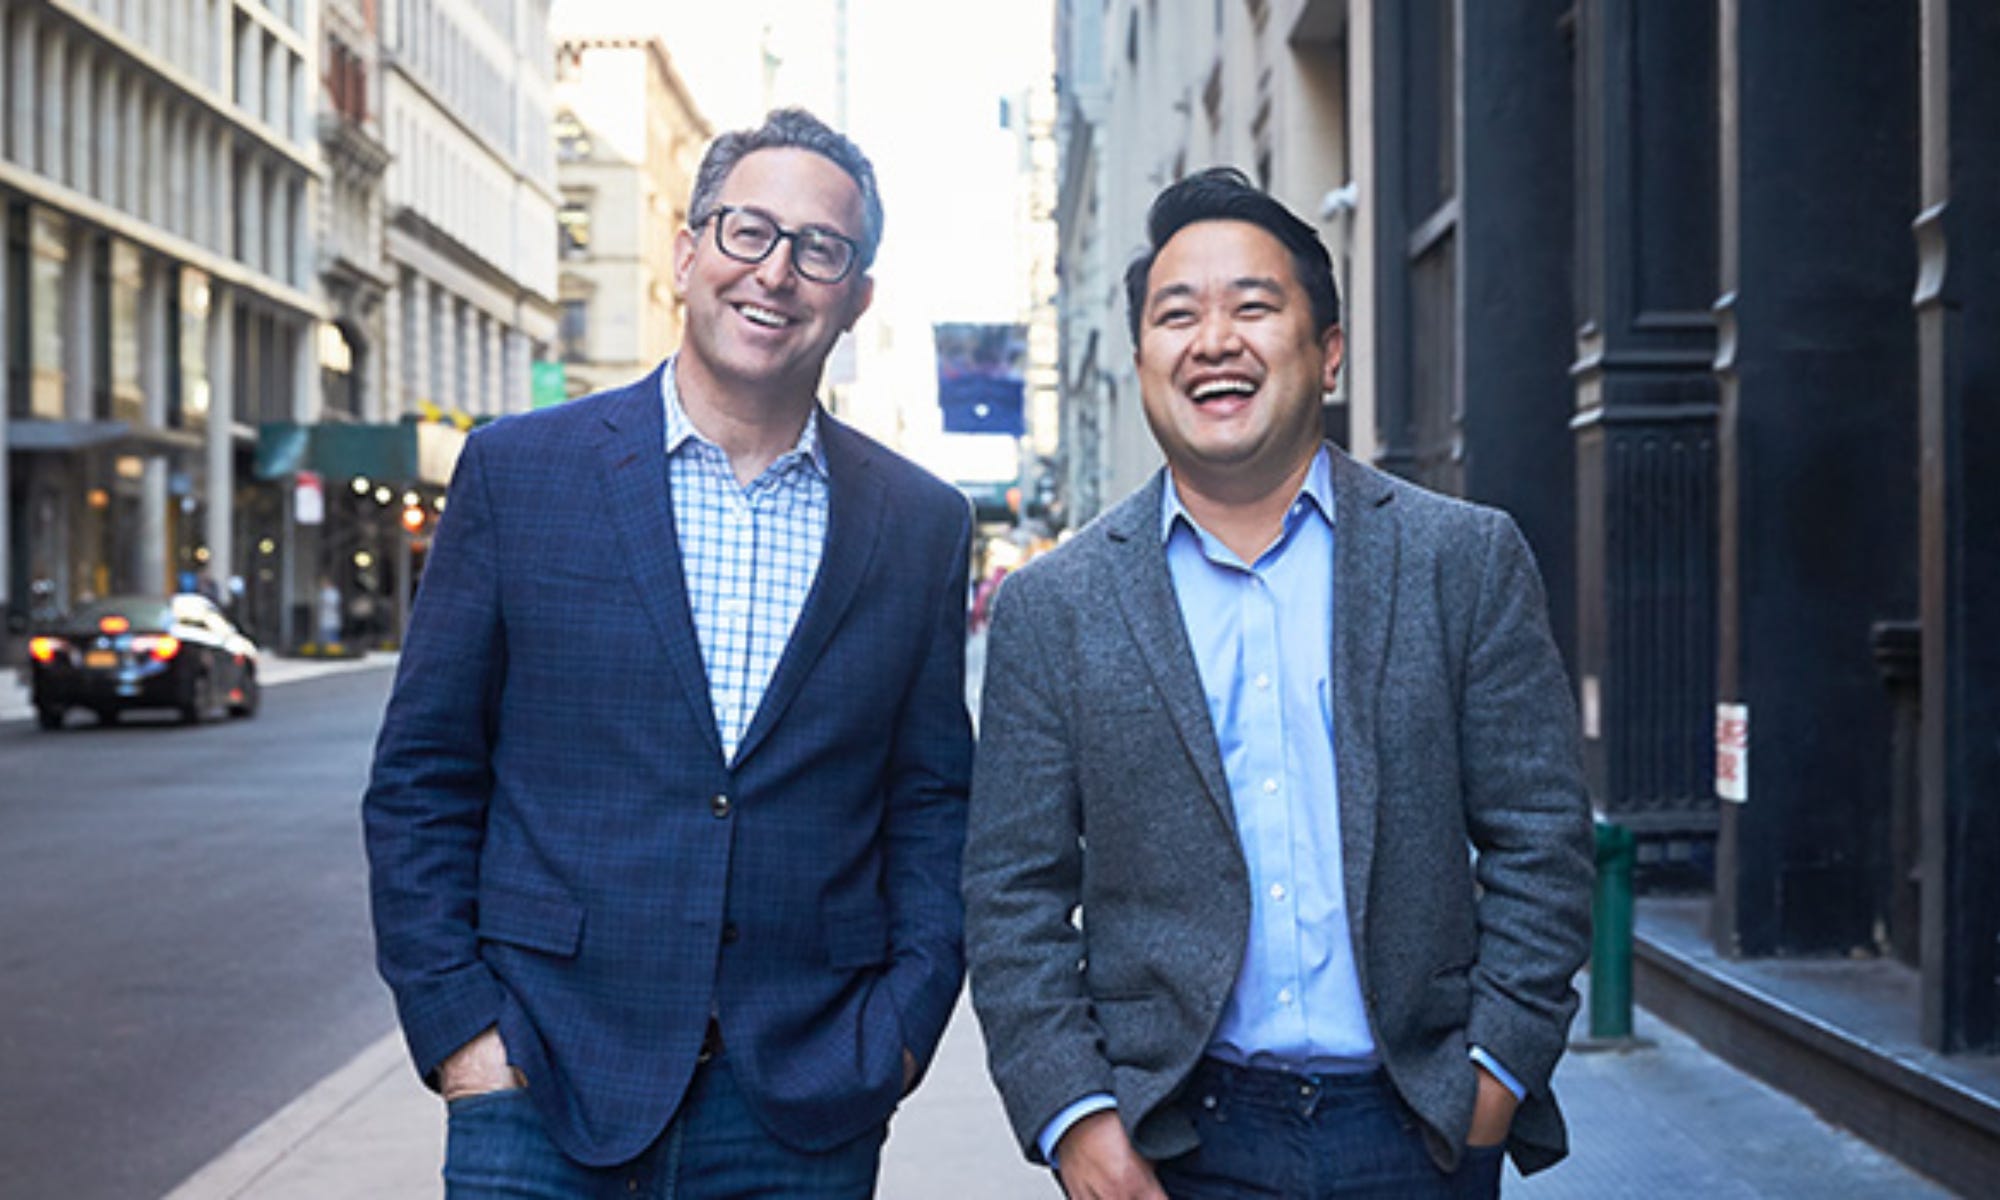 Foursquare CEO Jeff Glueck, with David Shim, former CEO of Placed, now President of Foursquare, in NYC